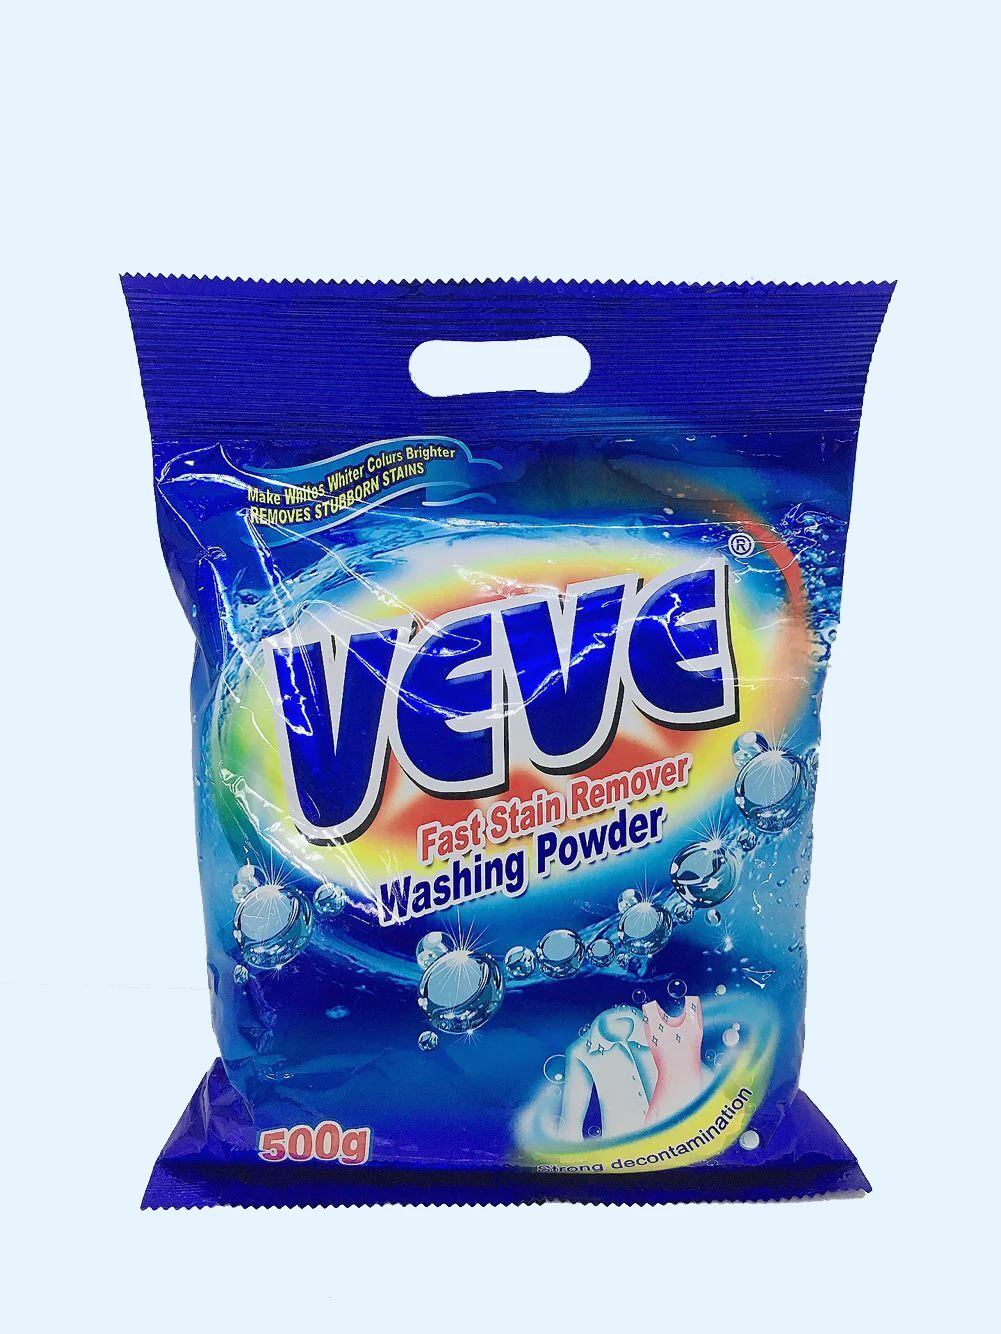 Veve Factory Direct Sale Detergent Base Powder Home Detergent Enzymes Buy Hot Sales Famous Washing Powder Laundry Detergent Powder Baby Detergent Liquid Product On Alibaba Com